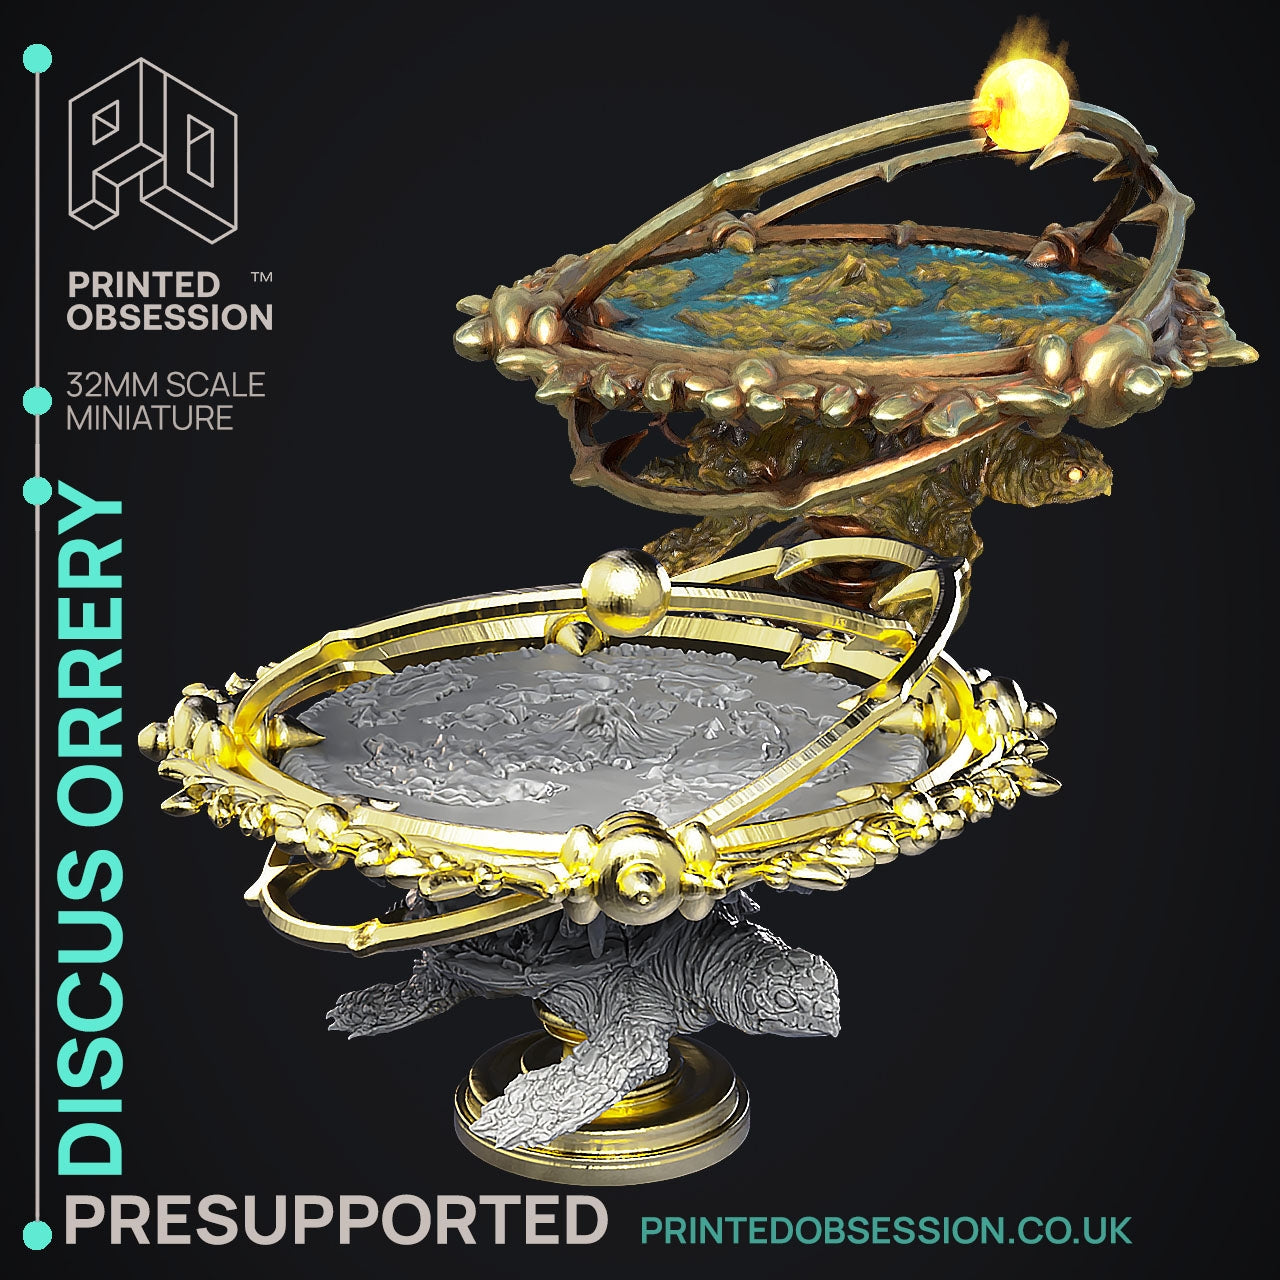 The Disc World Orrery - The Discus World - The Printed Obsession - Table-top mini, 3D Printed Collectable for painting and playing!